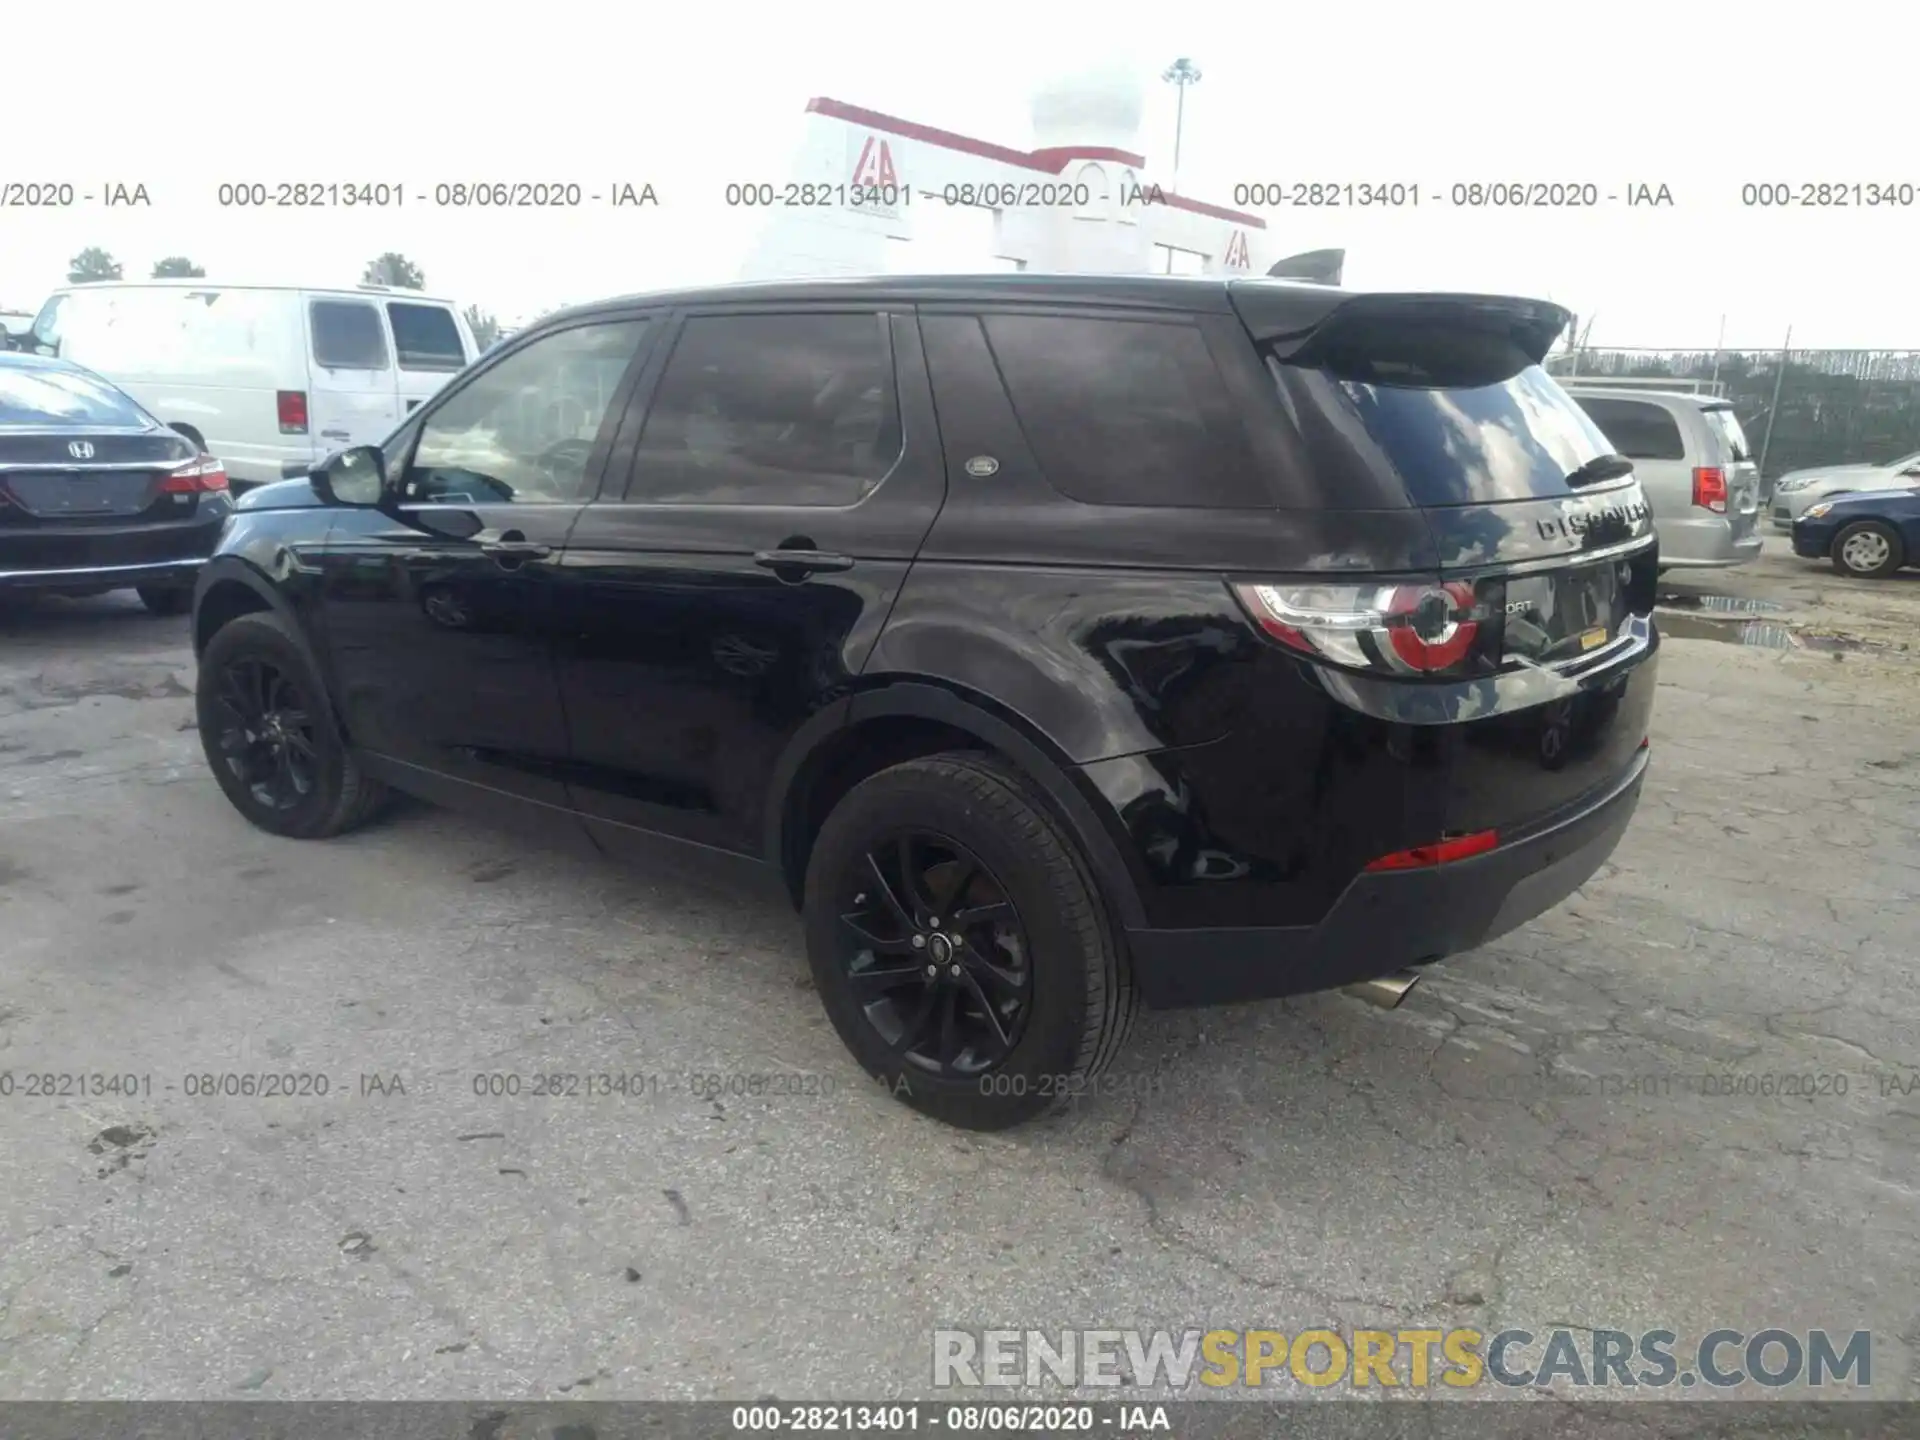 3 Photograph of a damaged car SALCP2FX8KH793294 LAND ROVER DISCOVERY SPORT 2019